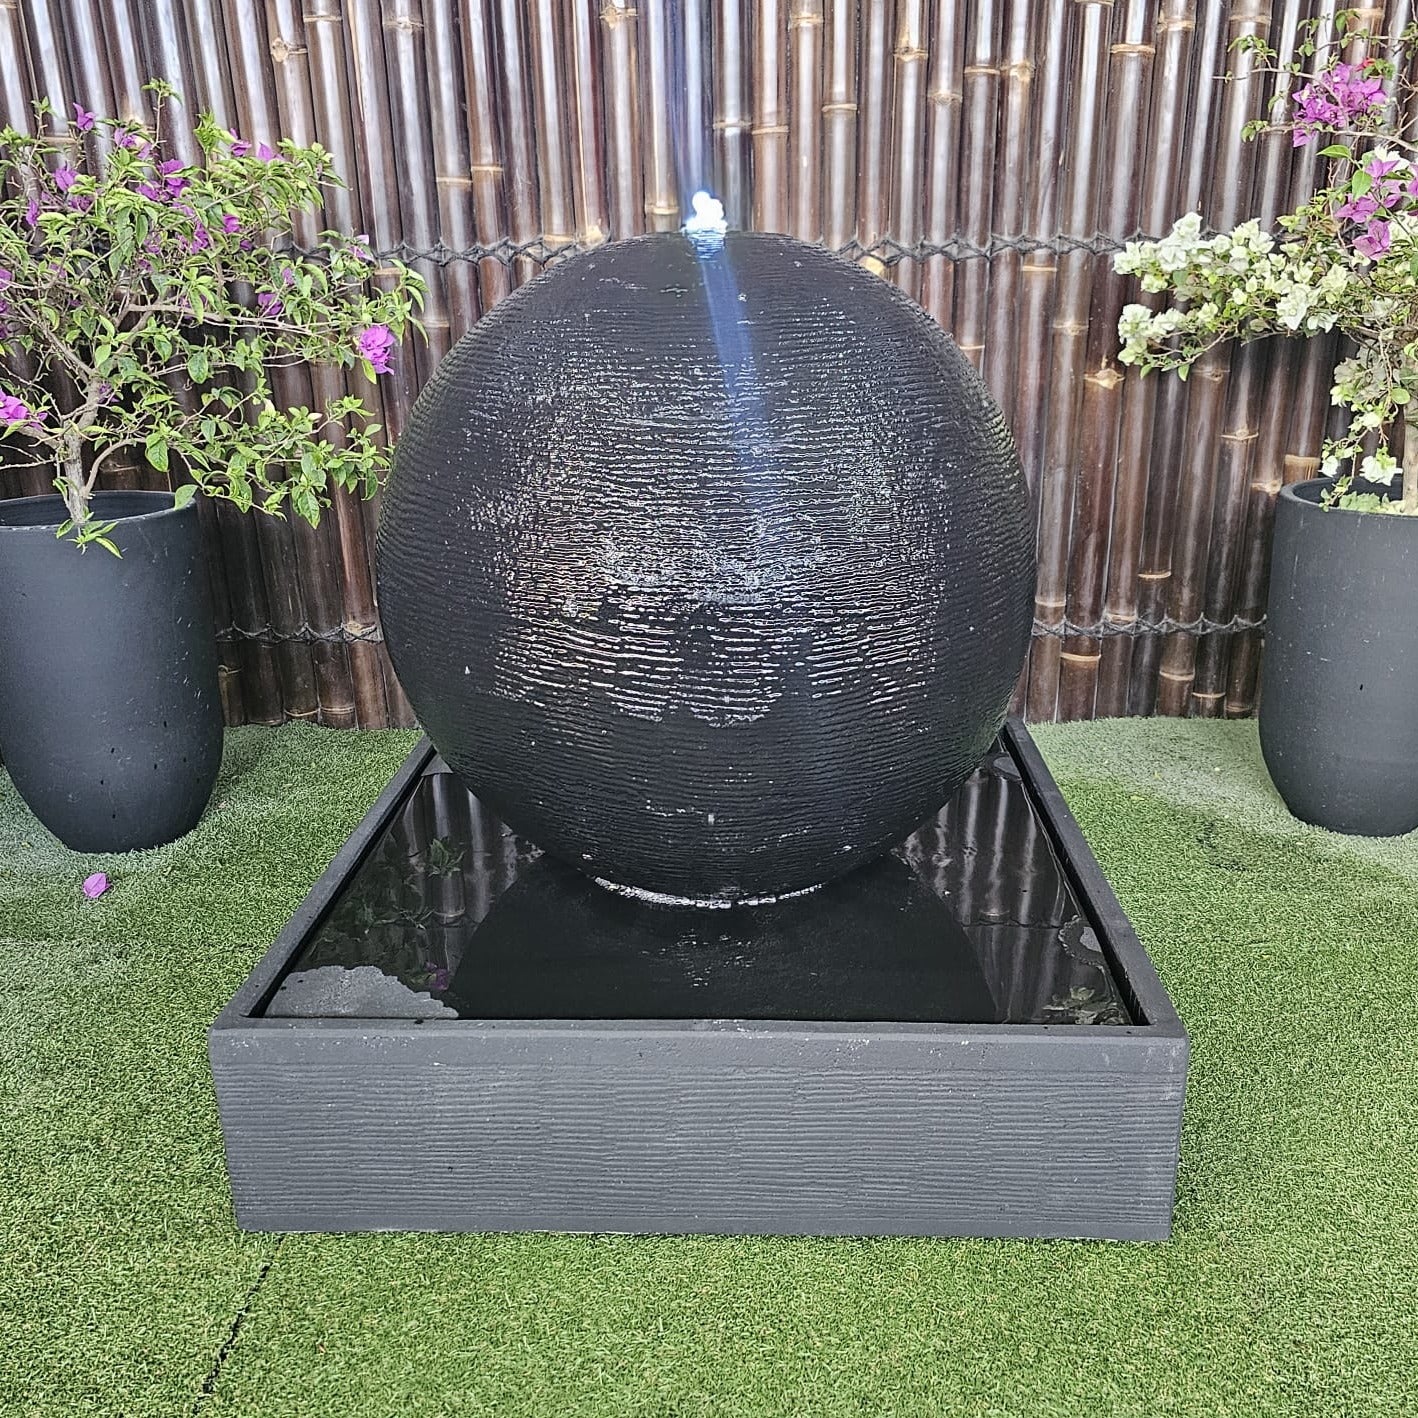 Luna Ball Fountain – Large Water Feature Charcoal Standard